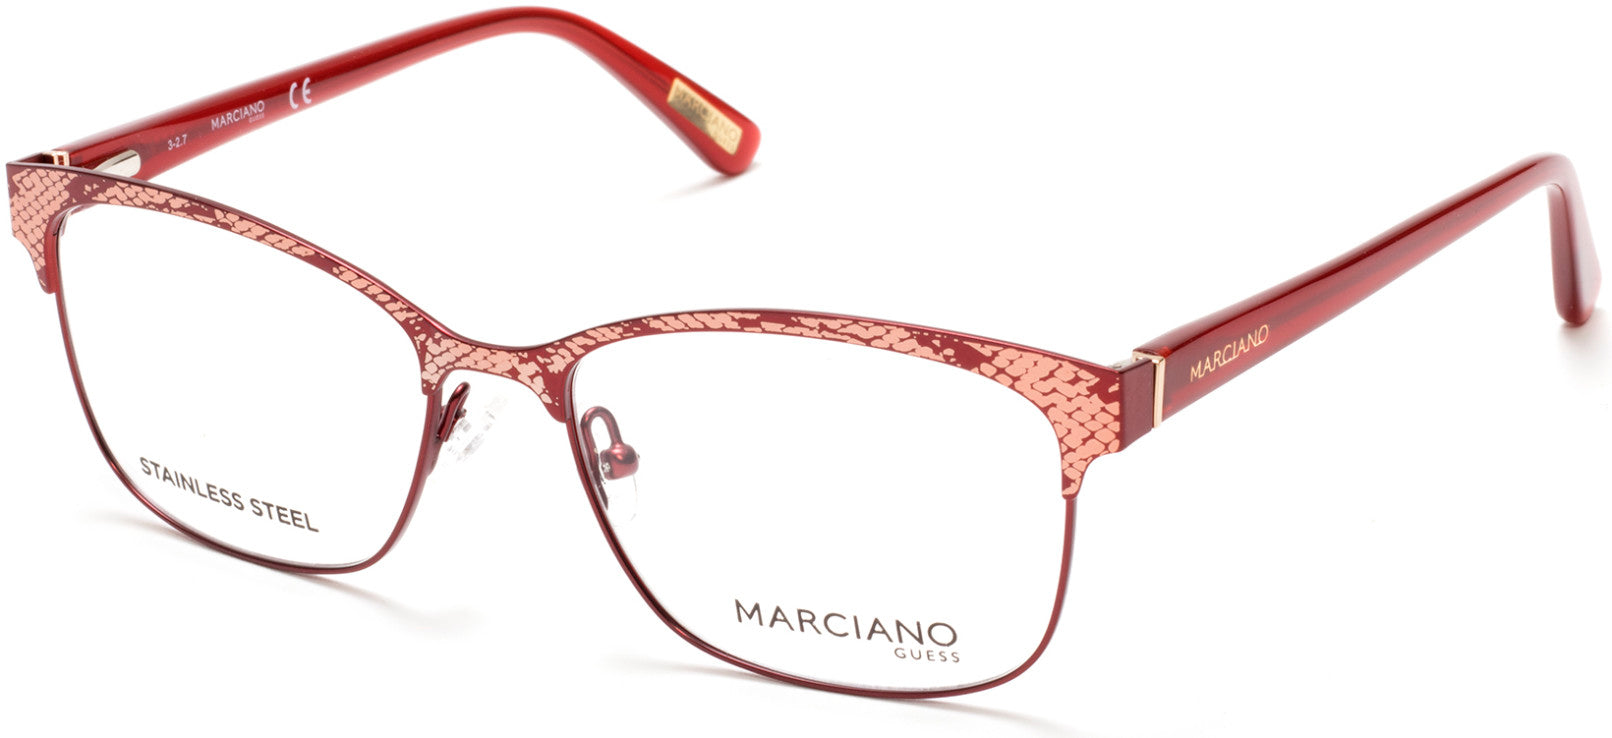 Guess By Marciano GM0318 Square Eyeglasses 070-070 - Matte Bordeaux